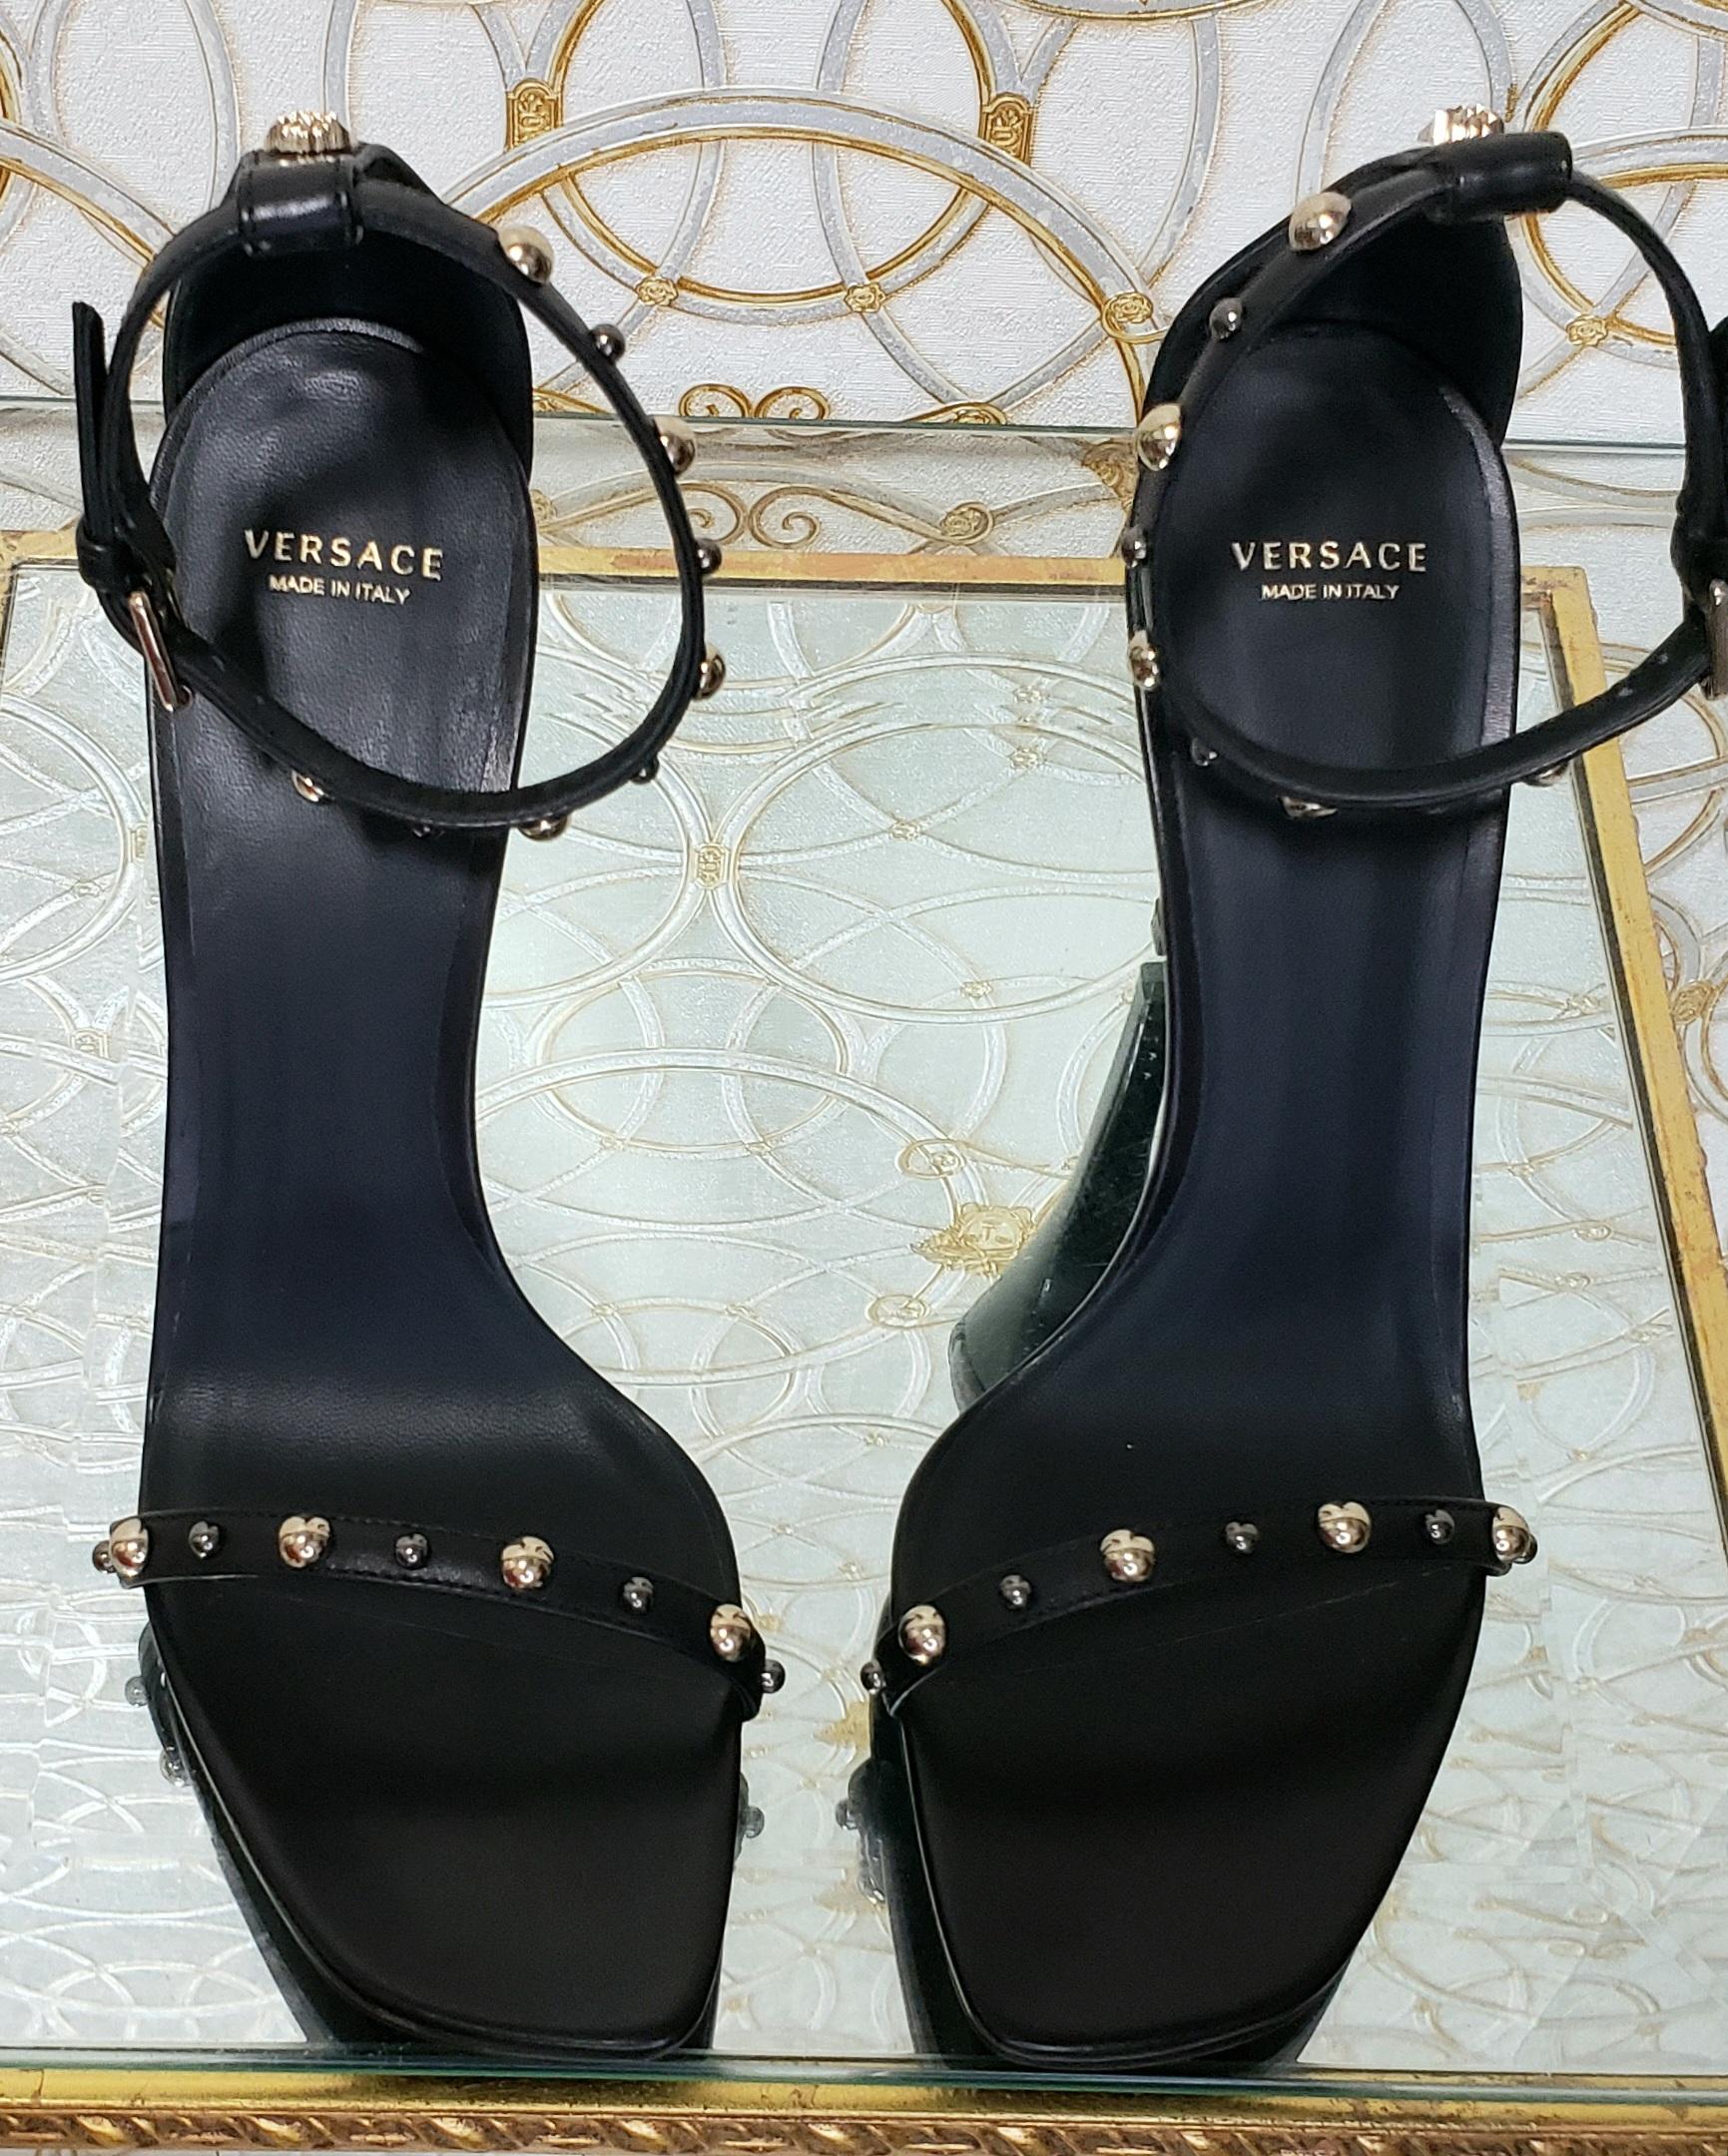  S/2018 look 43 VERSACE CITY STUD STRAP SANDALS IN BLACK 40.5 - 10.5 For Sale 2